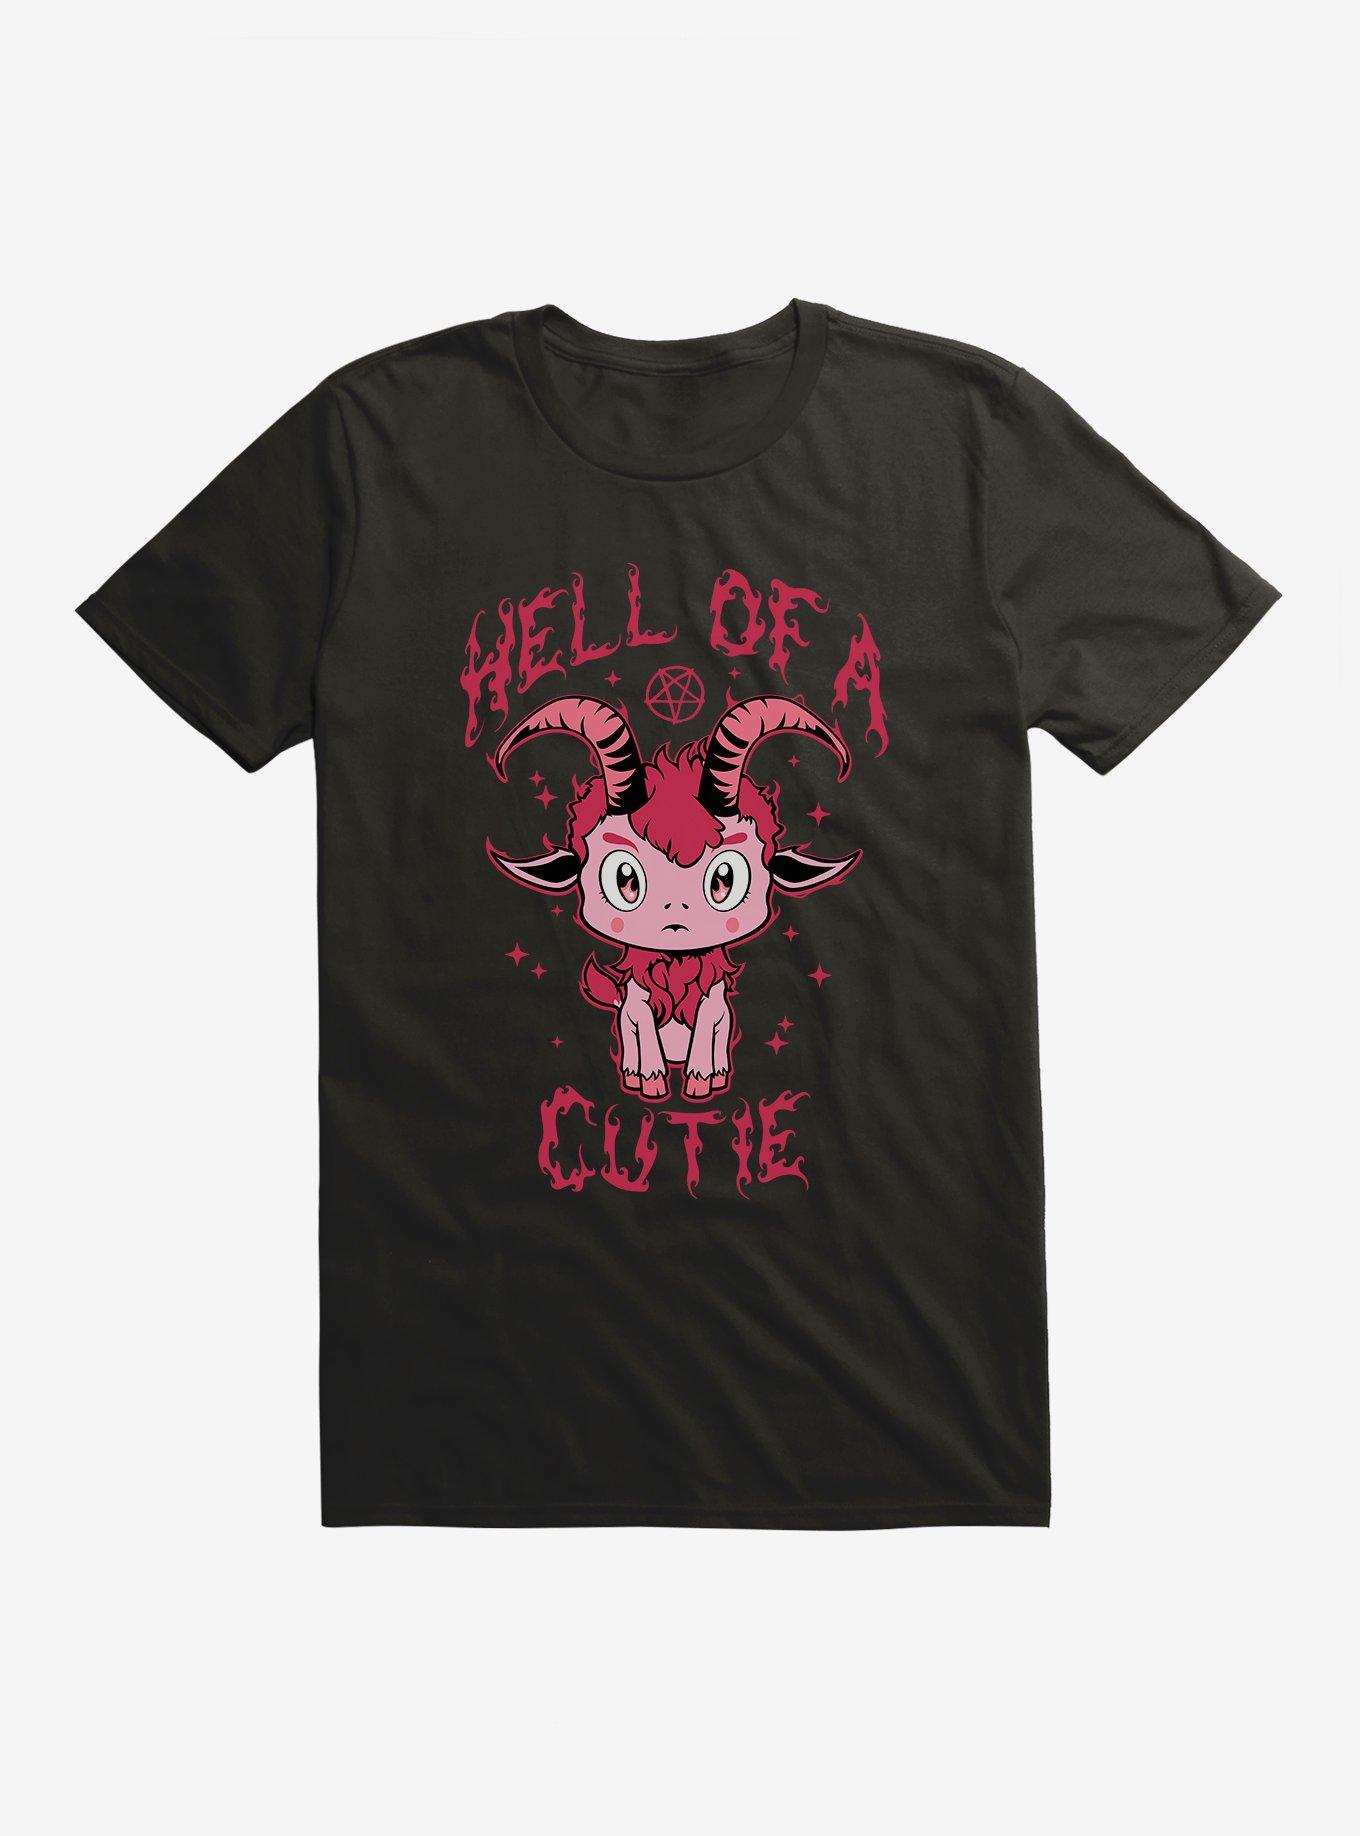 Hot Topic Hell Of A Cutie T-Shirt